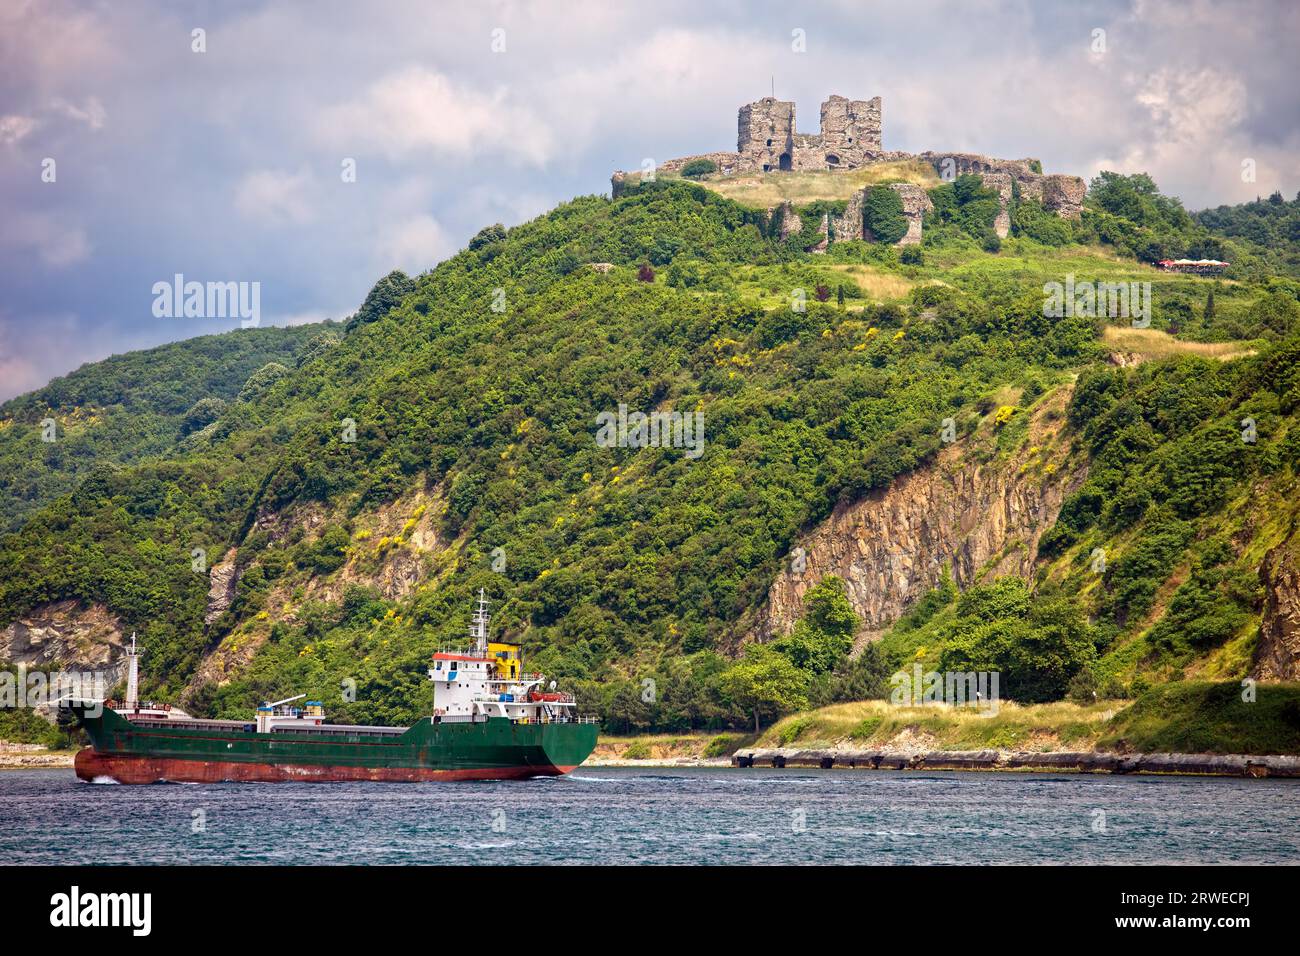 Yoros castle on the Bosphorus Strait at the top of a scenic hill in Turkey Stock Photo